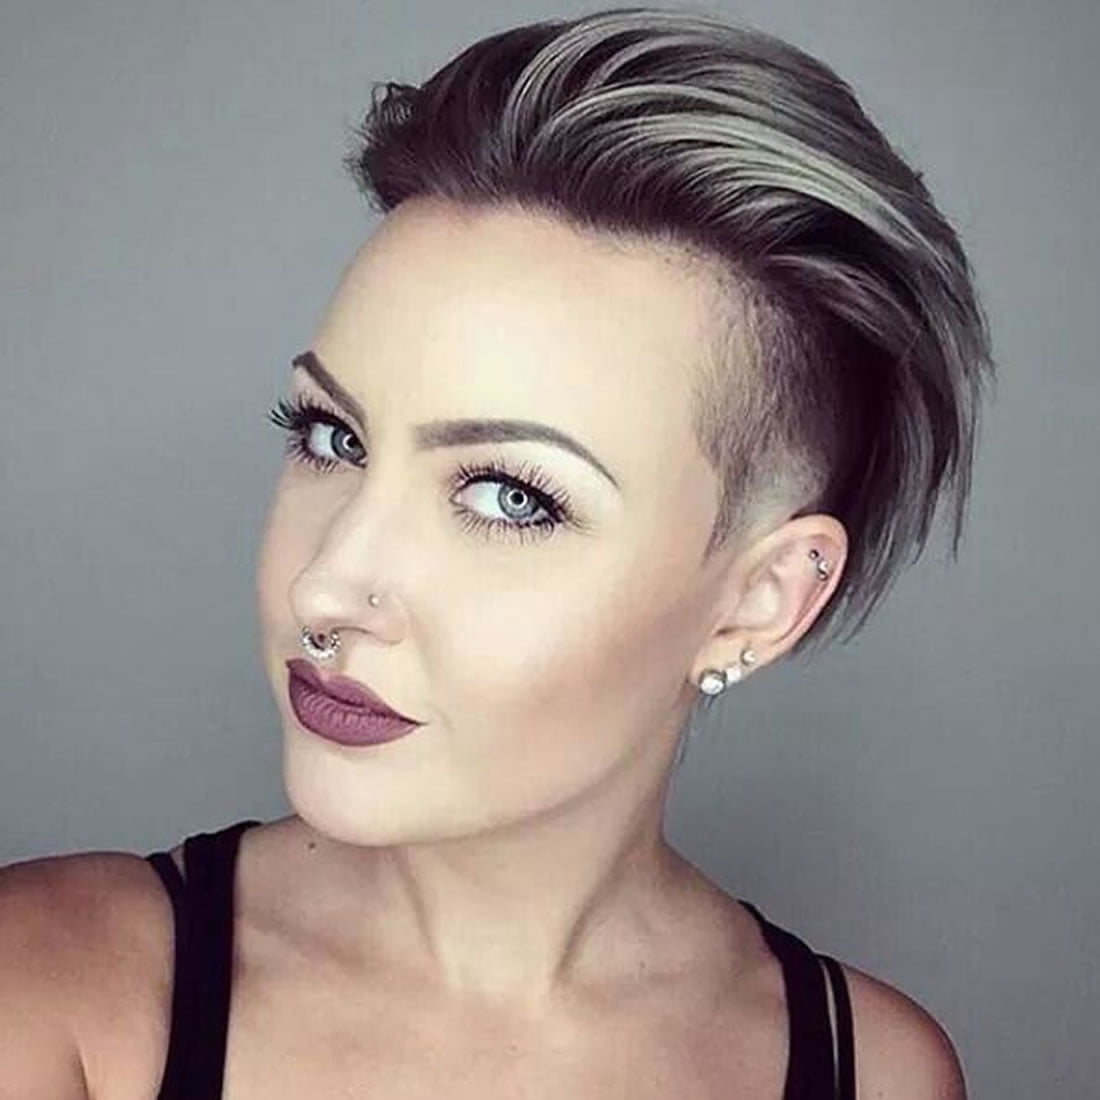 30 Glowing Undercut Short Hairstyles for Women – Page 2 – HAIRSTYLES